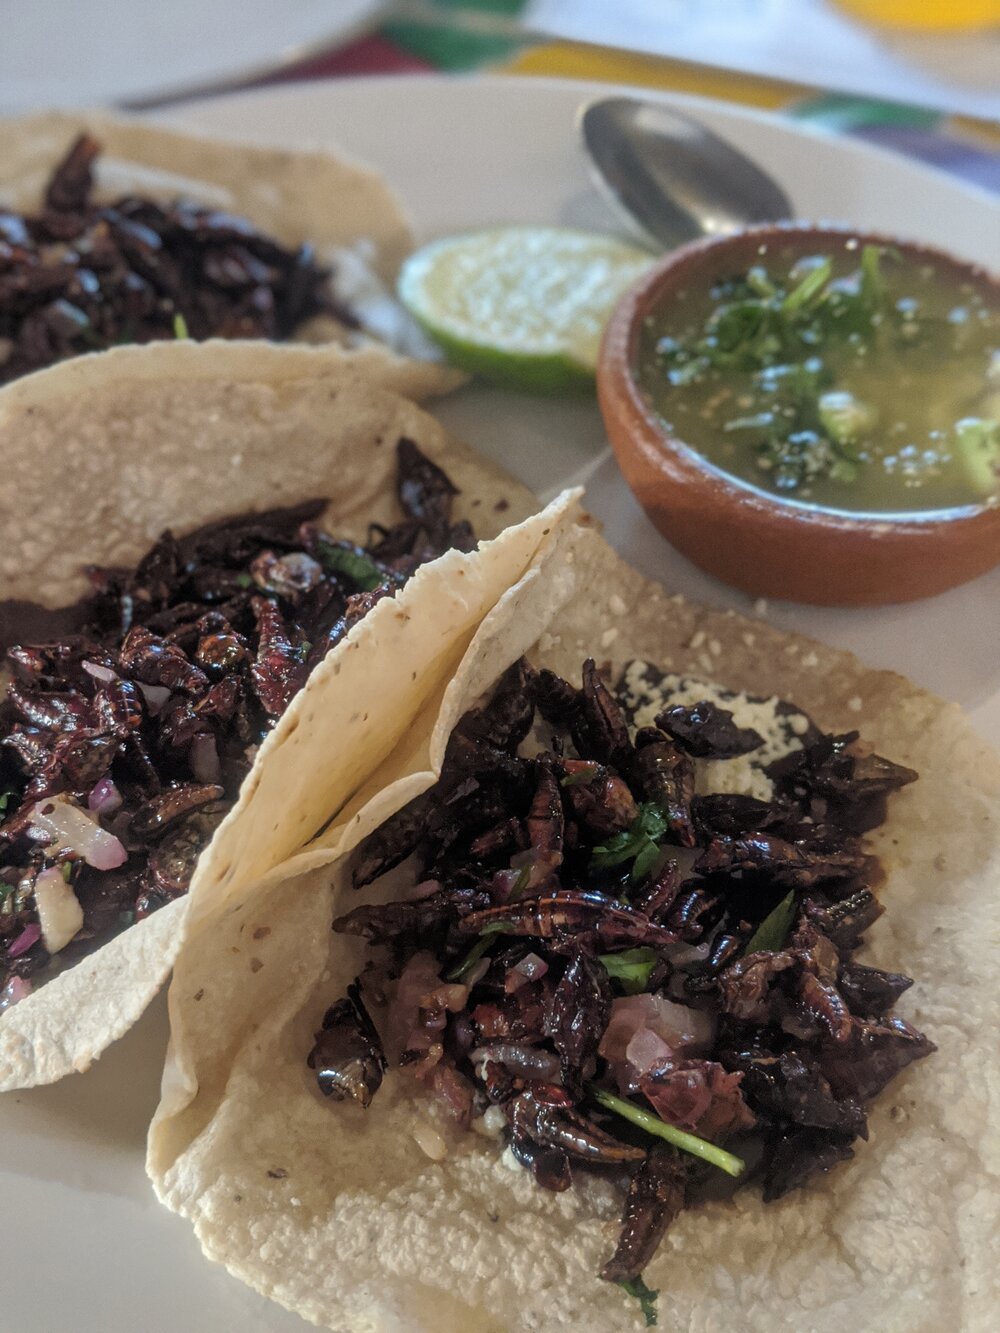 We came for the chapulines!